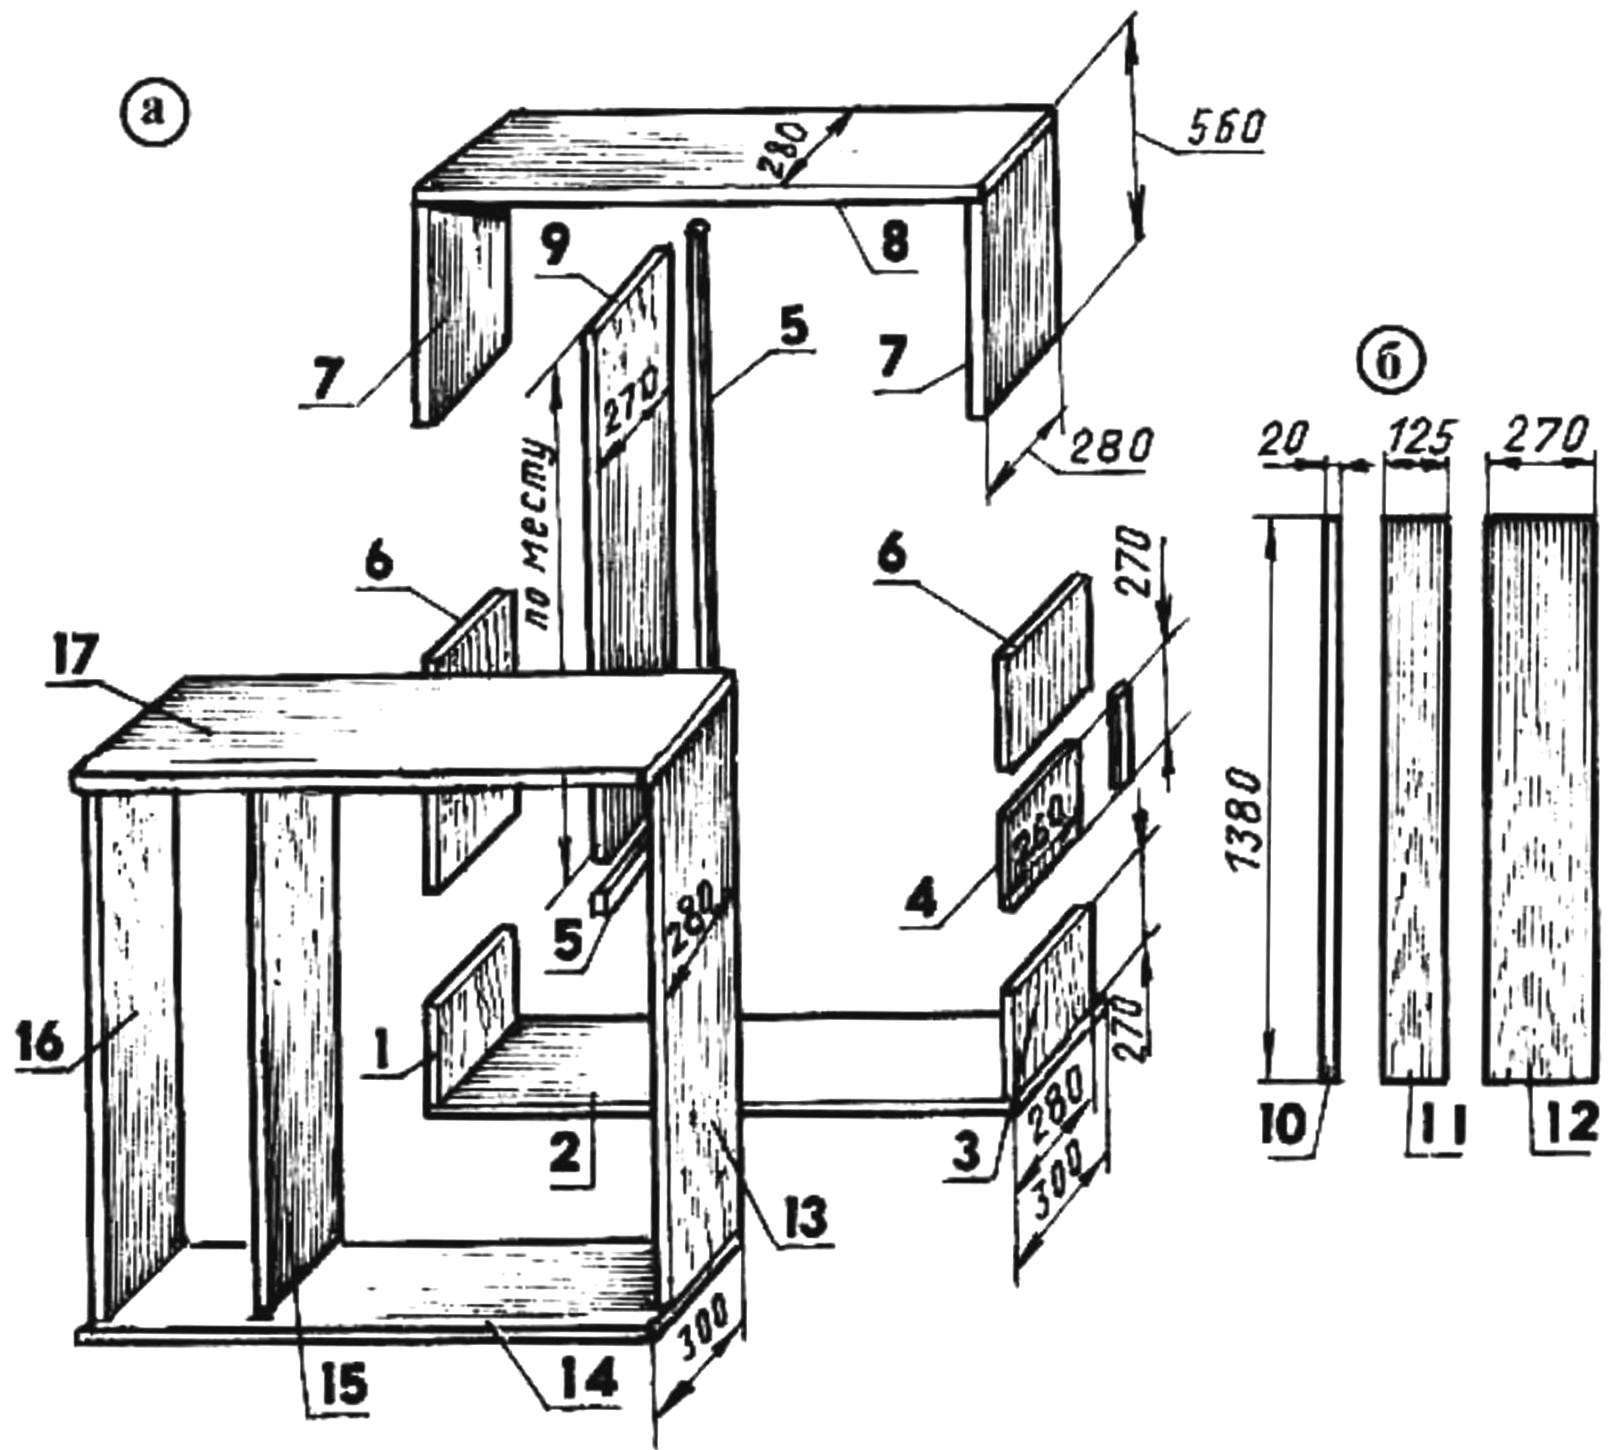 Fig. 3. Cutting hull panels (a) and right door (b) wardrobe manufacturing wardrobe